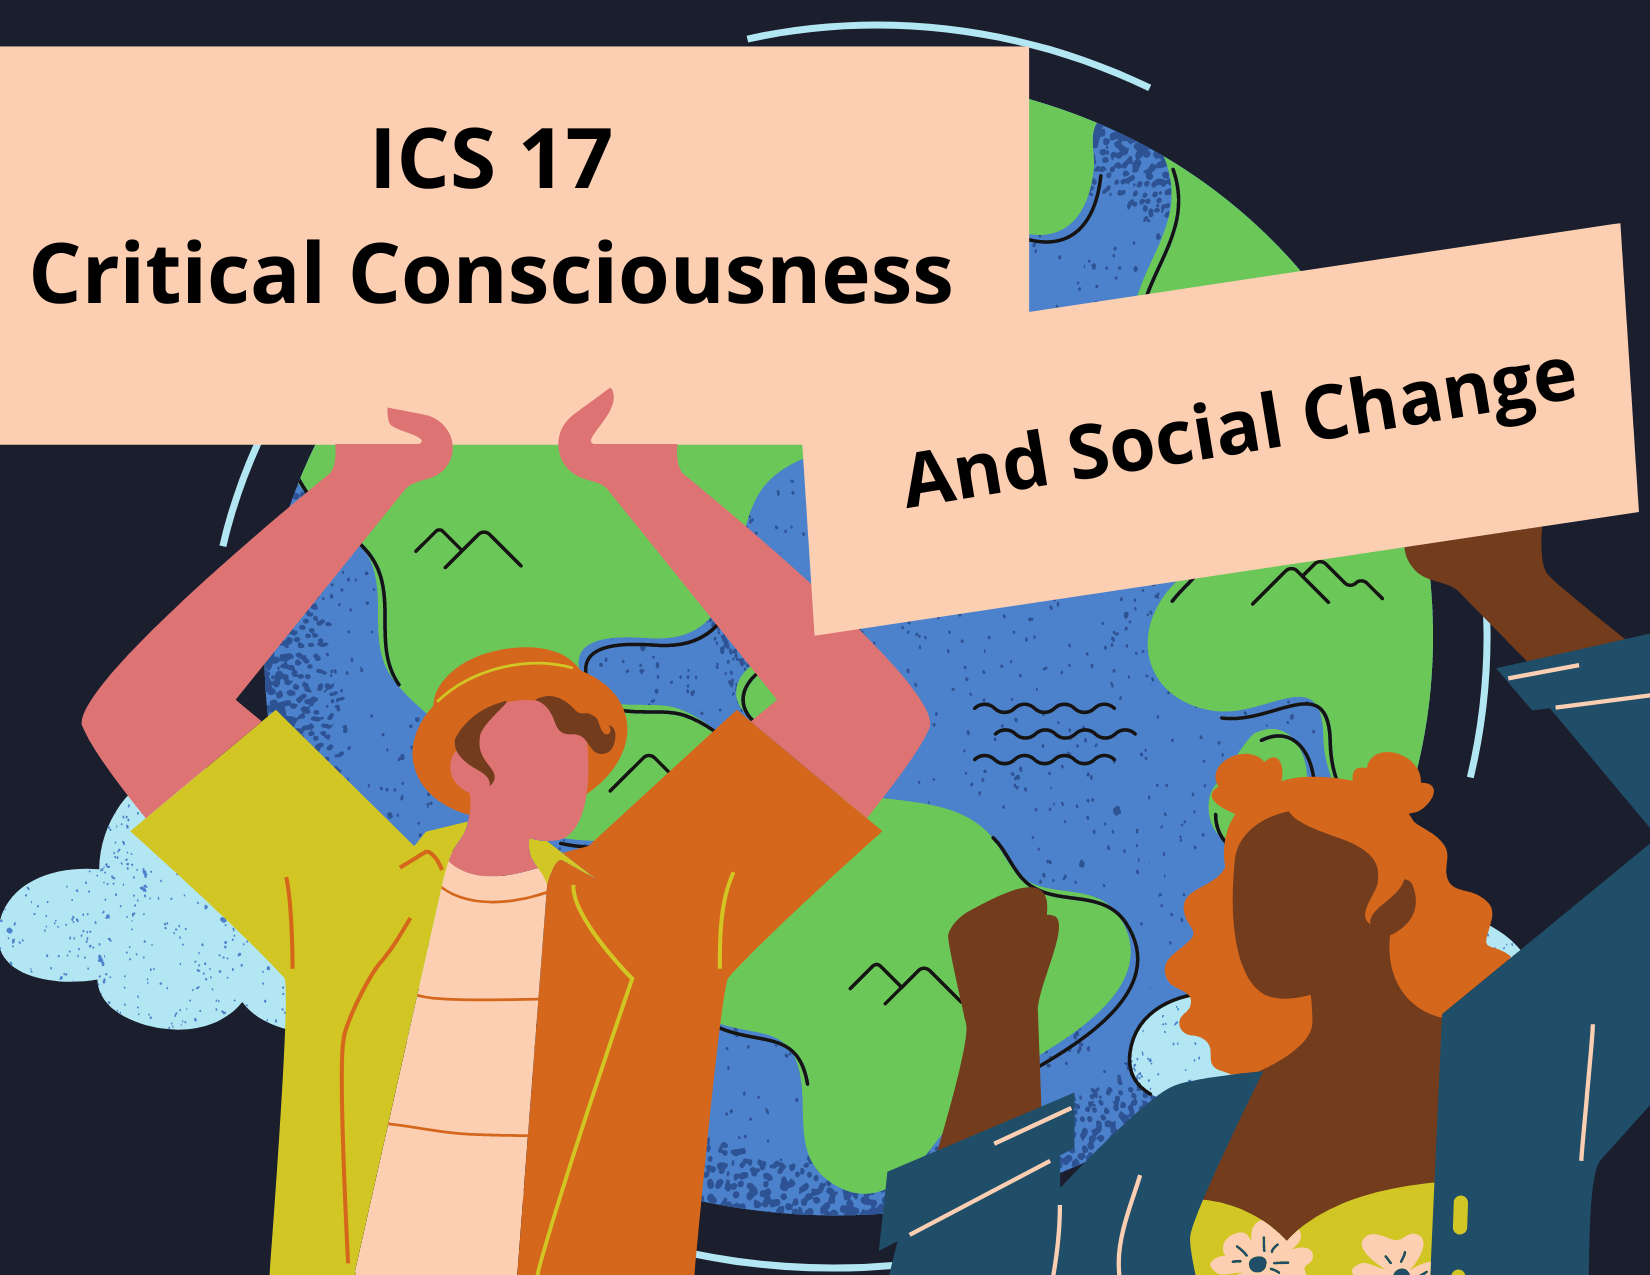 graphic showing two people holding up signs that say "ICS 17 ciritcal conscience and social change."